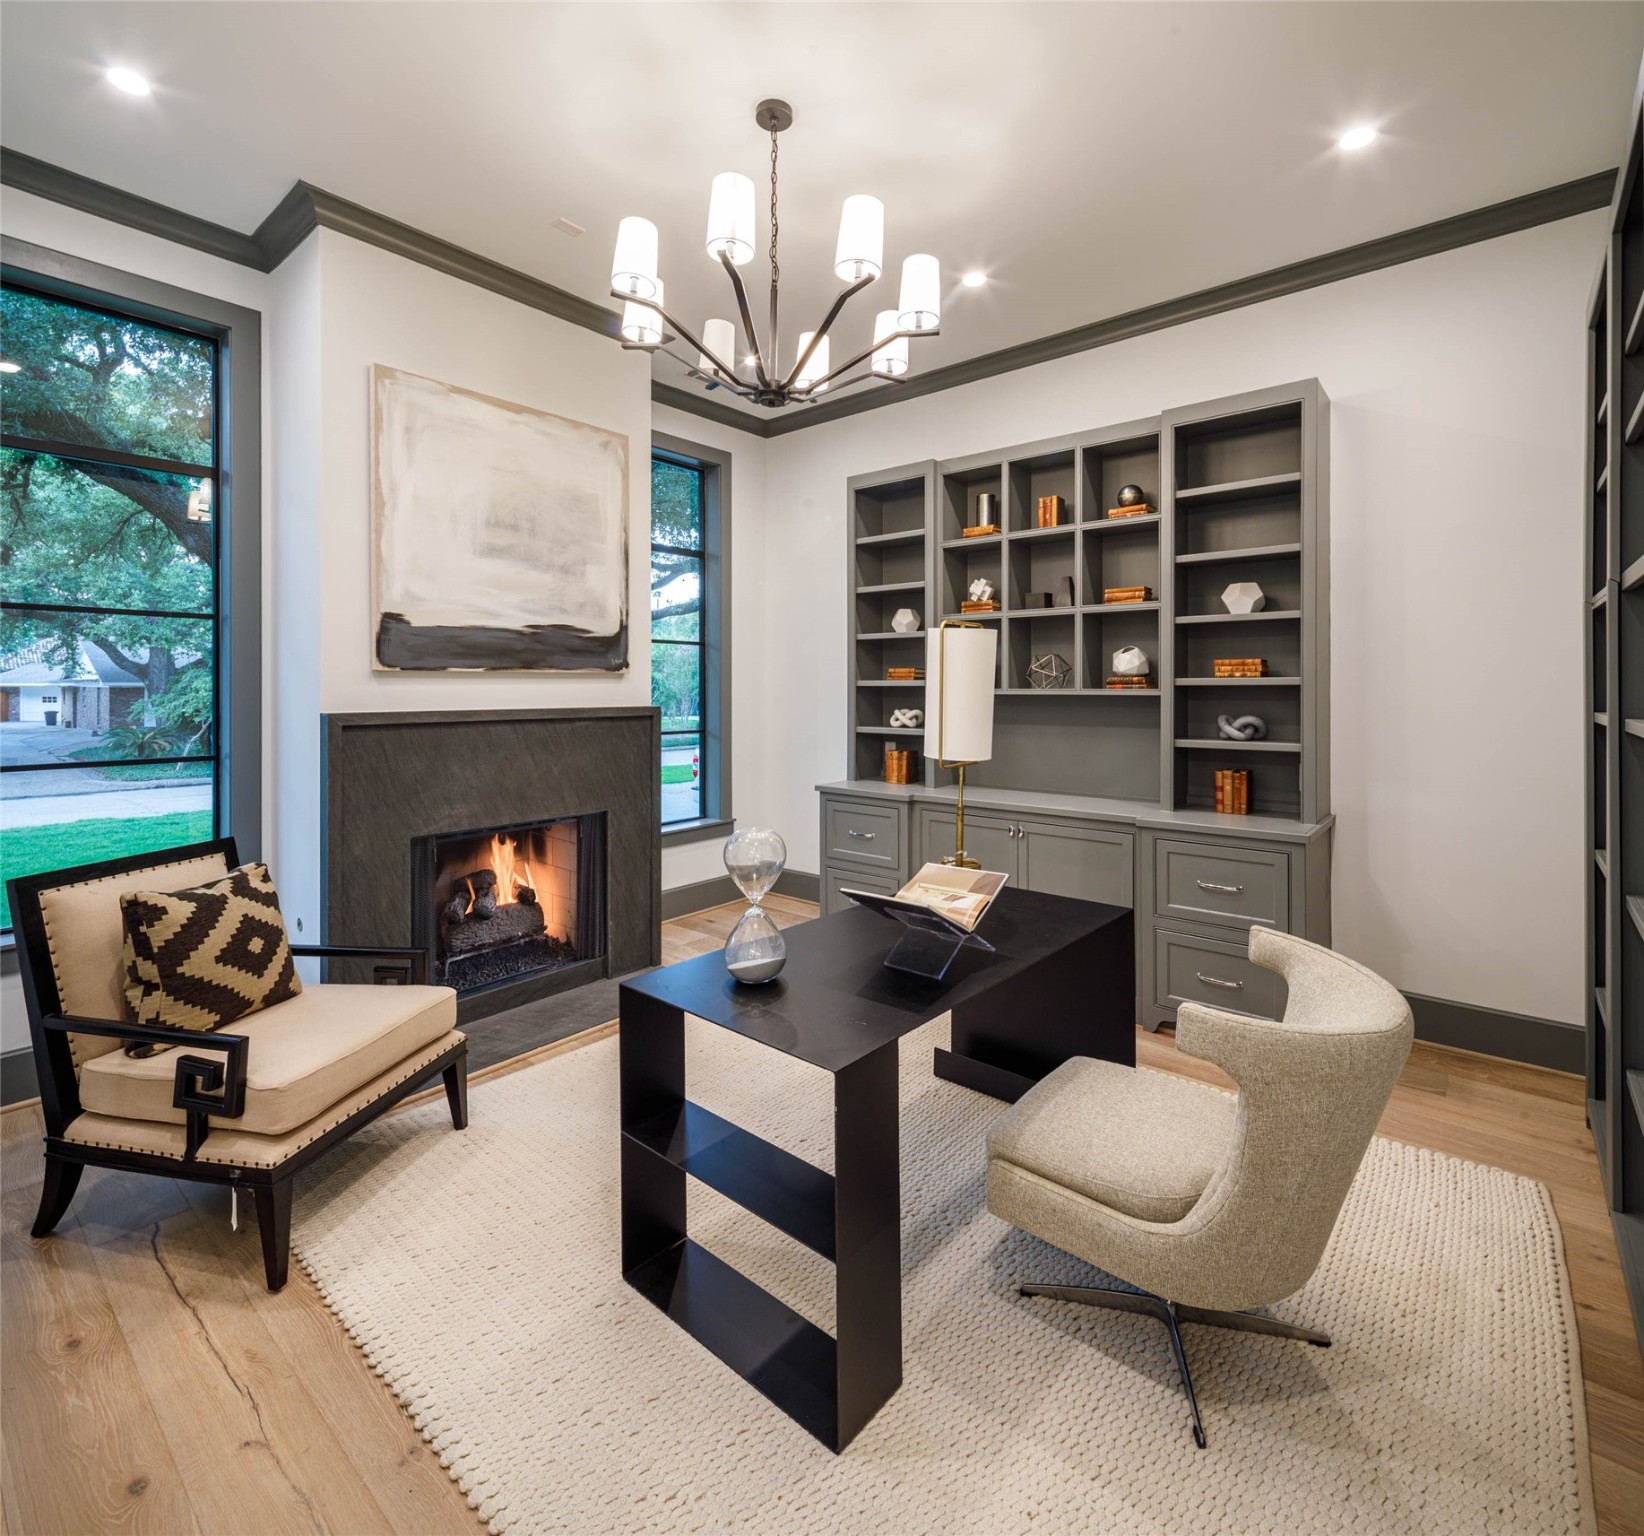 A beautifully designed functional and classy home office that will inspire your productivity.  Features fire place with marble mantle, built-in book cases, an integrated concealed walk-in closet and designer chandelier